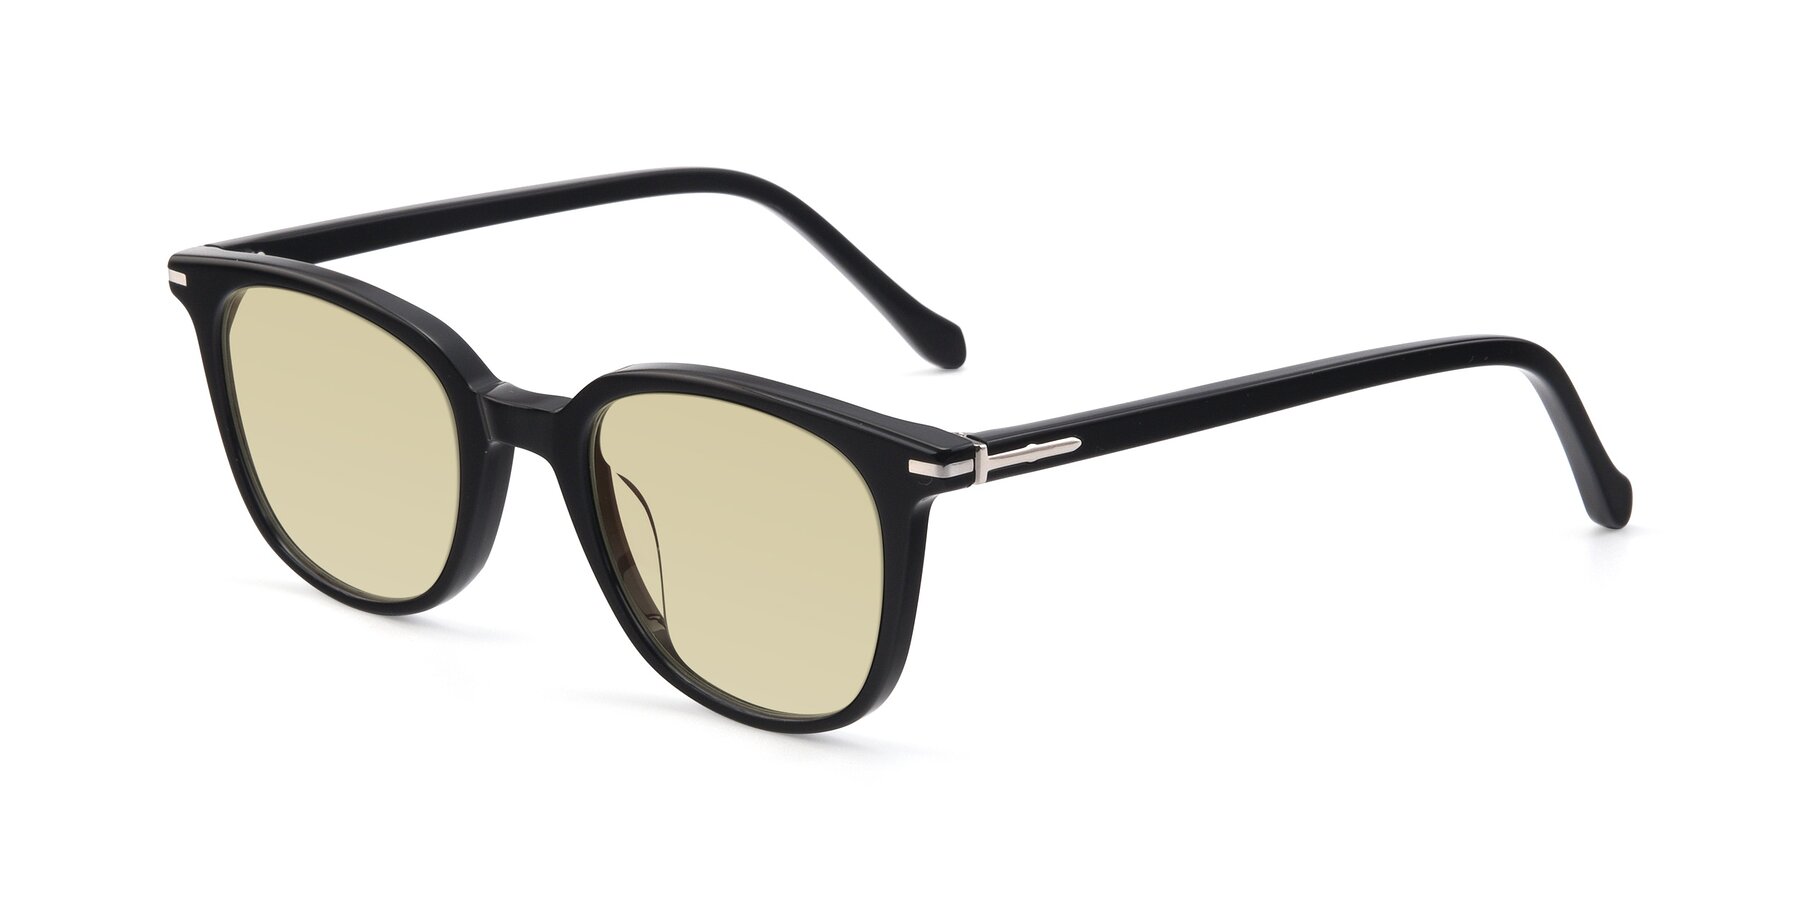 Angle of 17562 in Black with Light Champagne Tinted Lenses